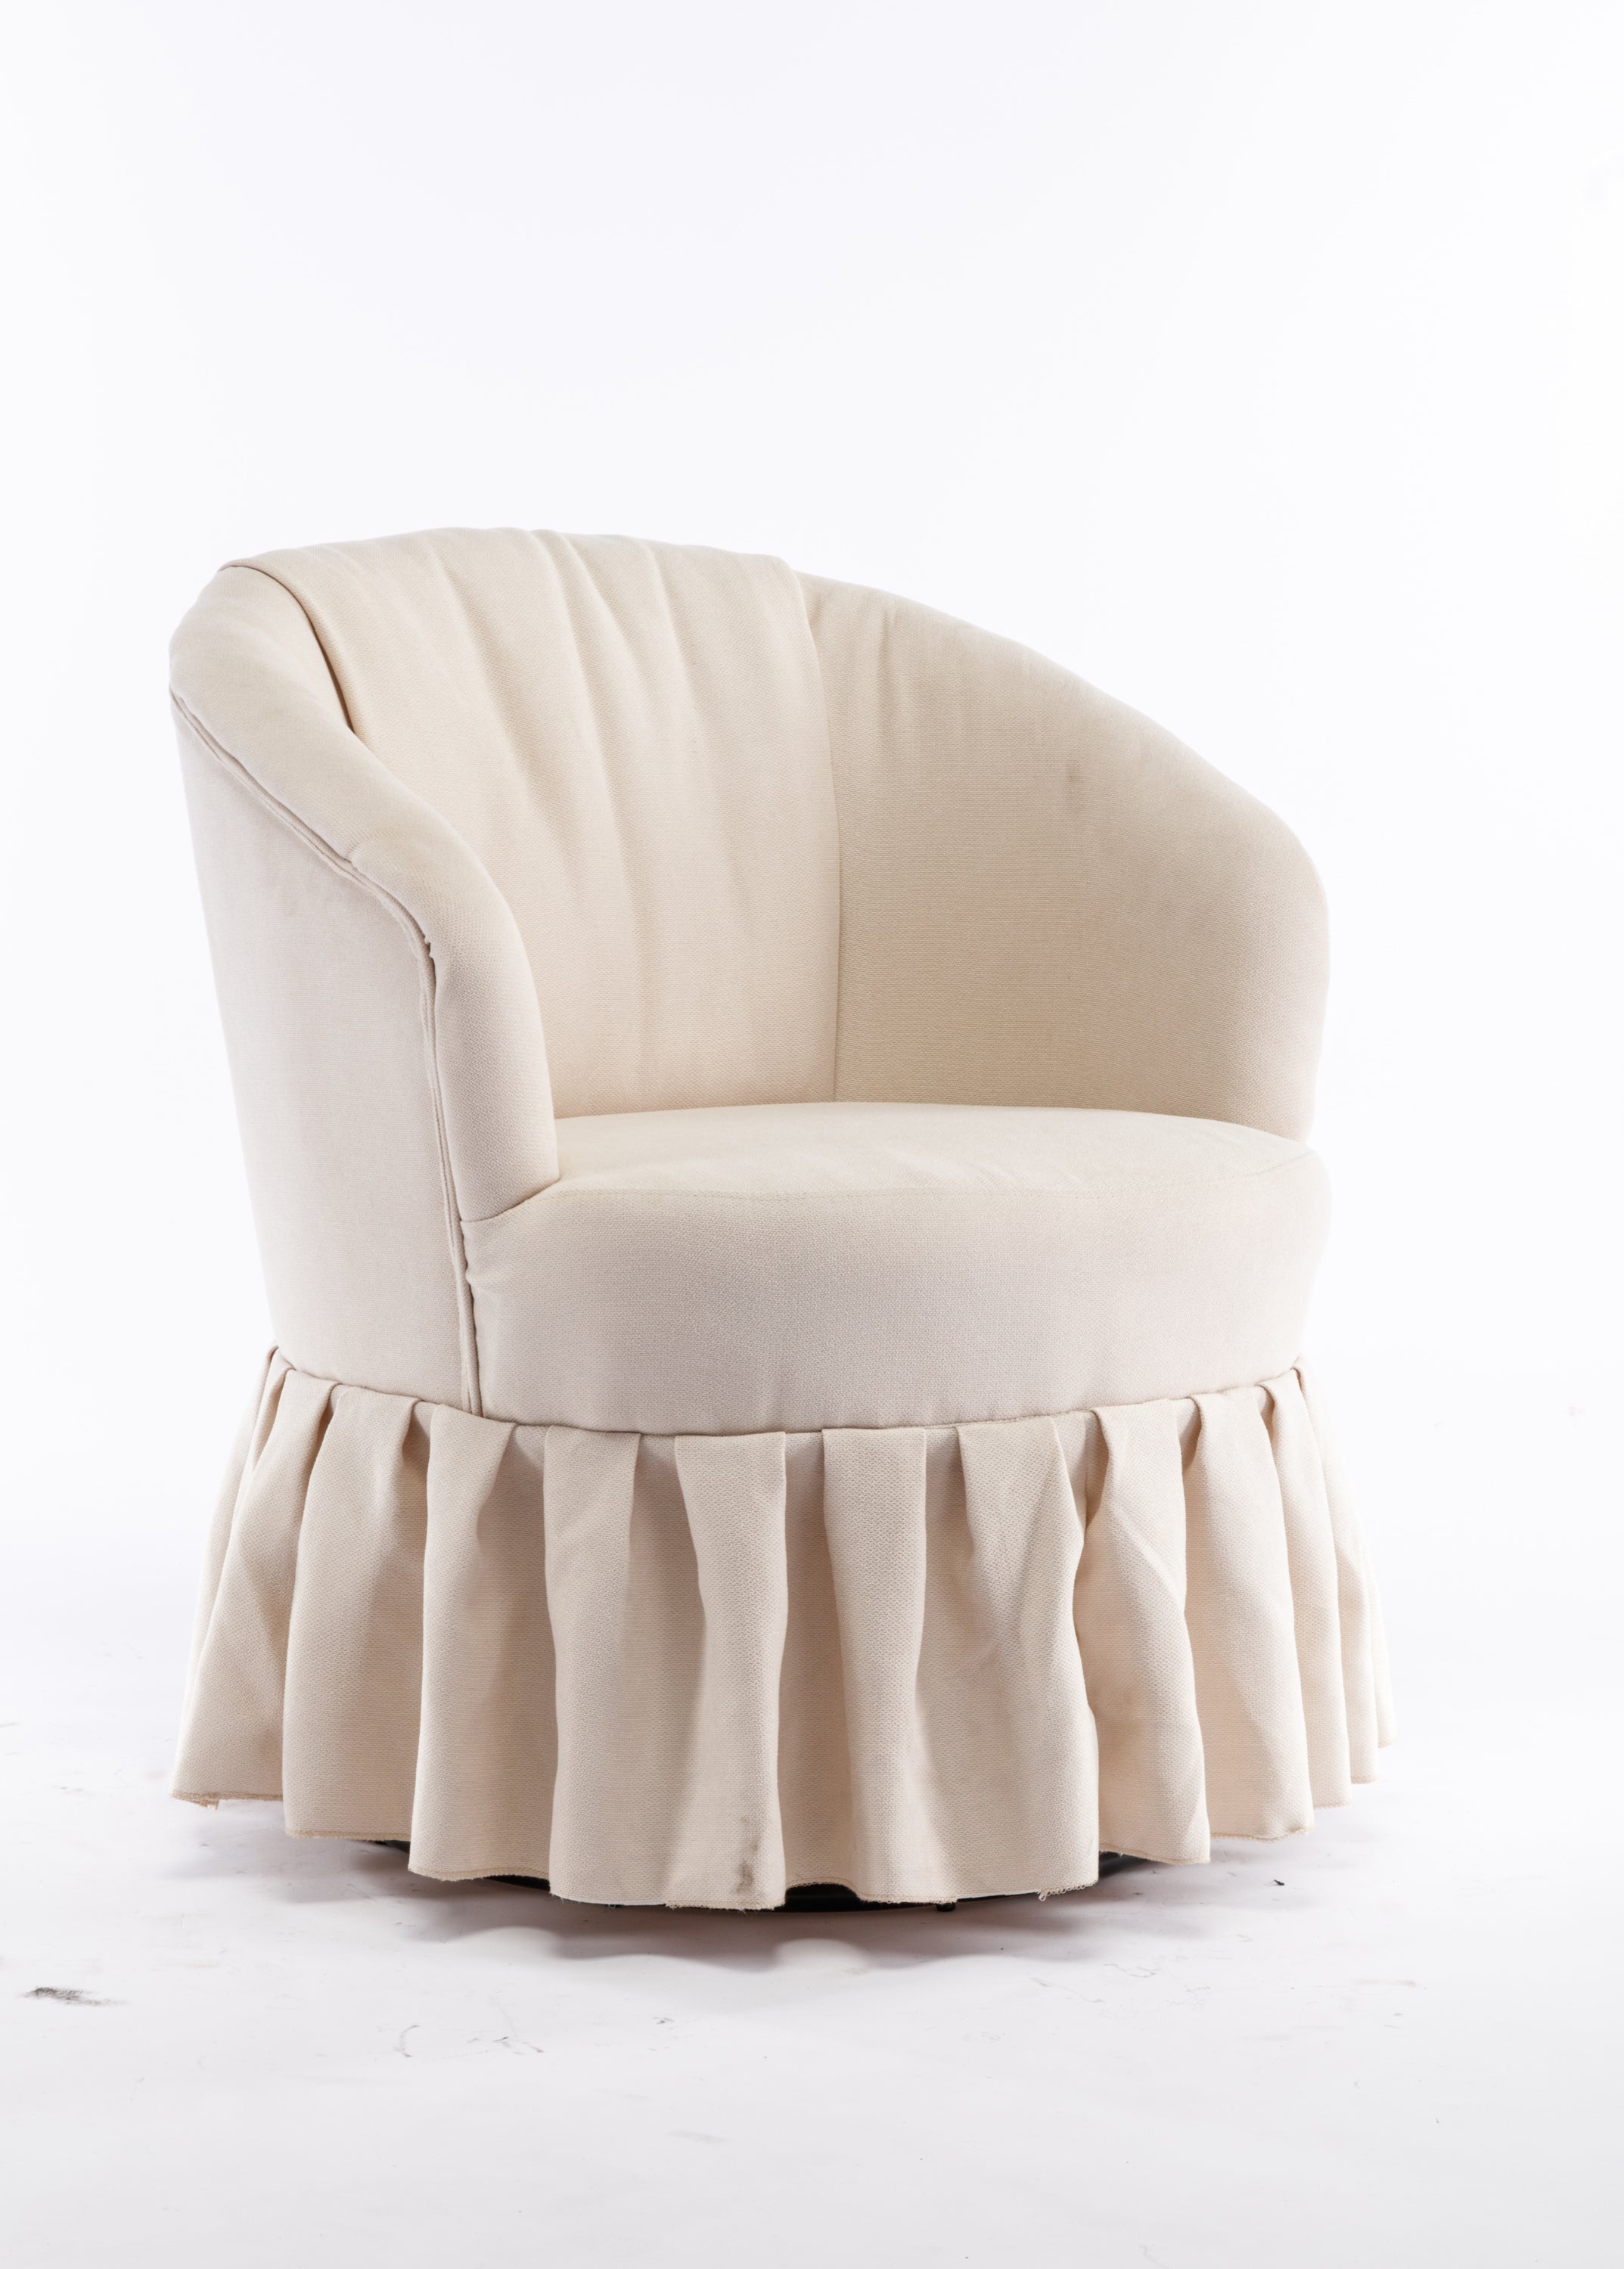 Linen Fabric Accent Swivel Chair Auditorium Chair With Pleated Skirt - Beige